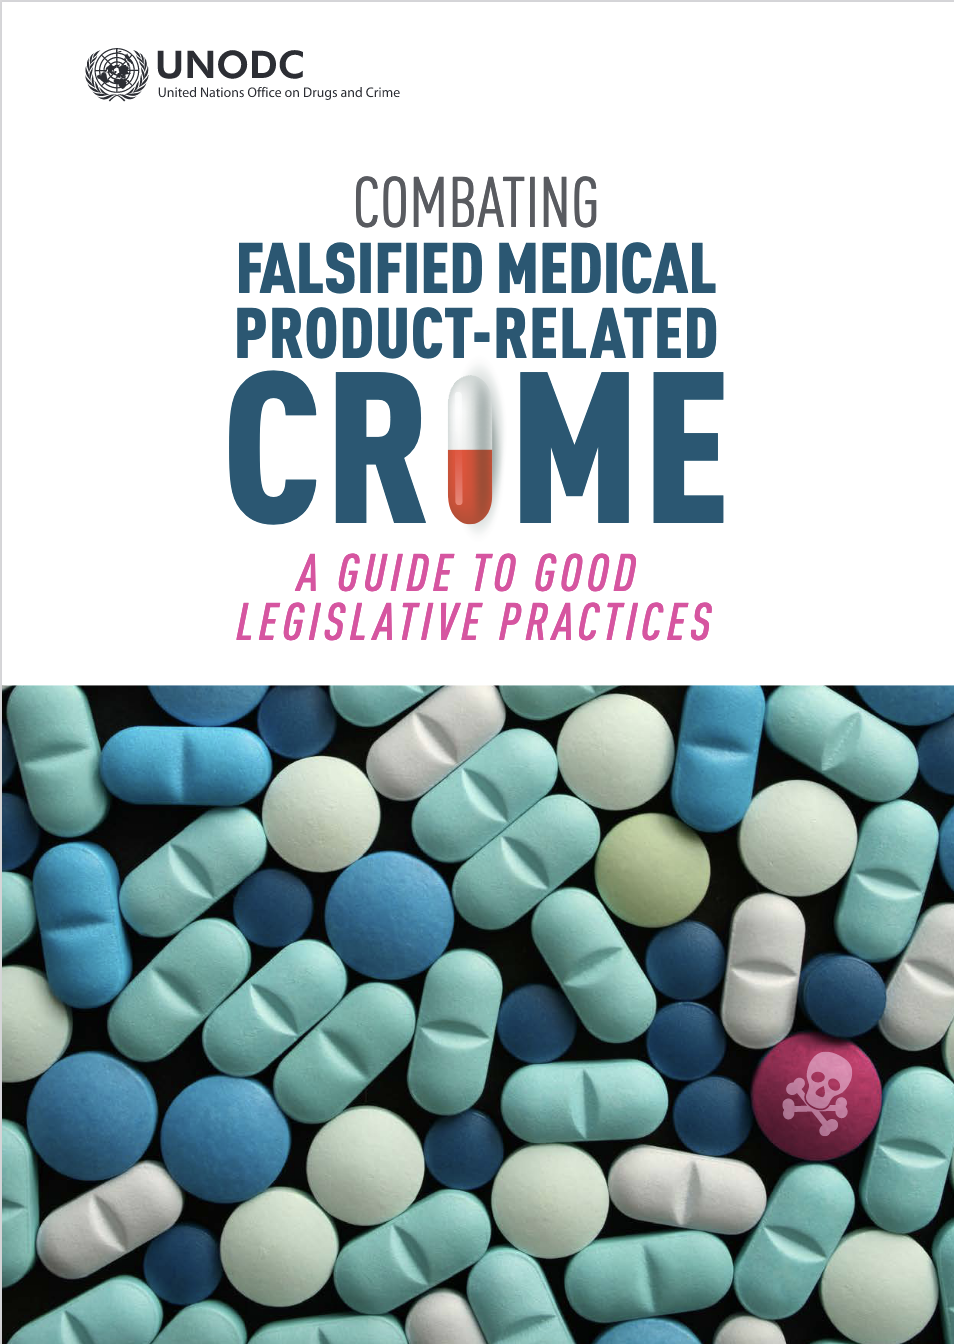 Cover page of the UNODC publication “Combating Falsified Medical Product-Related Crime: A Guide to Good Legislative Practices”.